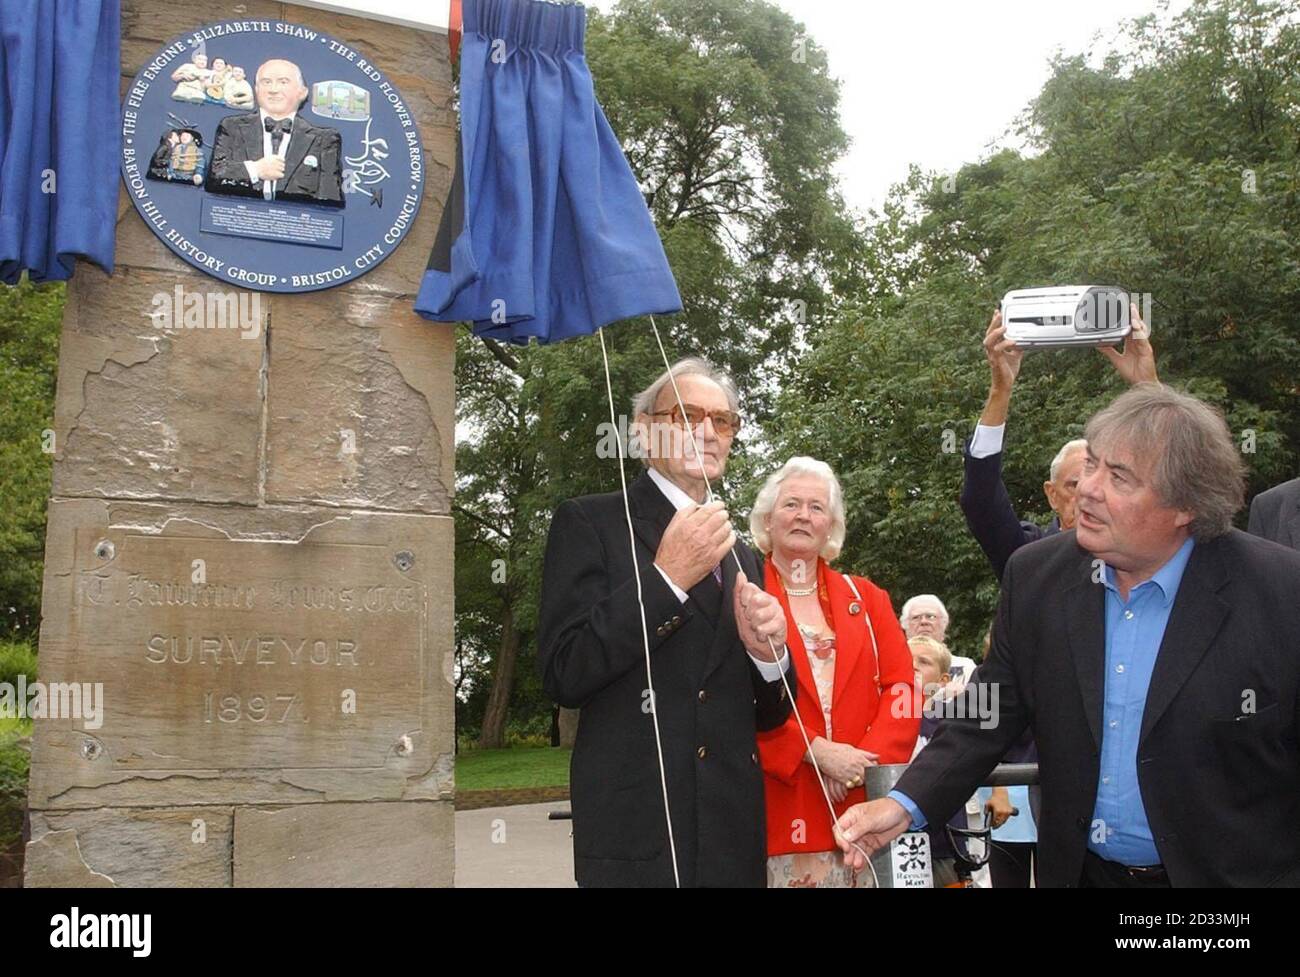 Entertainer Eddie Large (right) helped by Bob Hope's cousin Sidney Hope unveils a plaque commemorating British-born comedian Bob Hope - exactly ayear after his death - at St Georges Park in Bristol. Hope, who died of pneumonia at his home in Toluca Lake, California, two months after his 100th birthday, lived in Bristol for two years when he was a small child before moving to America with his family at the age of four. Stock Photo